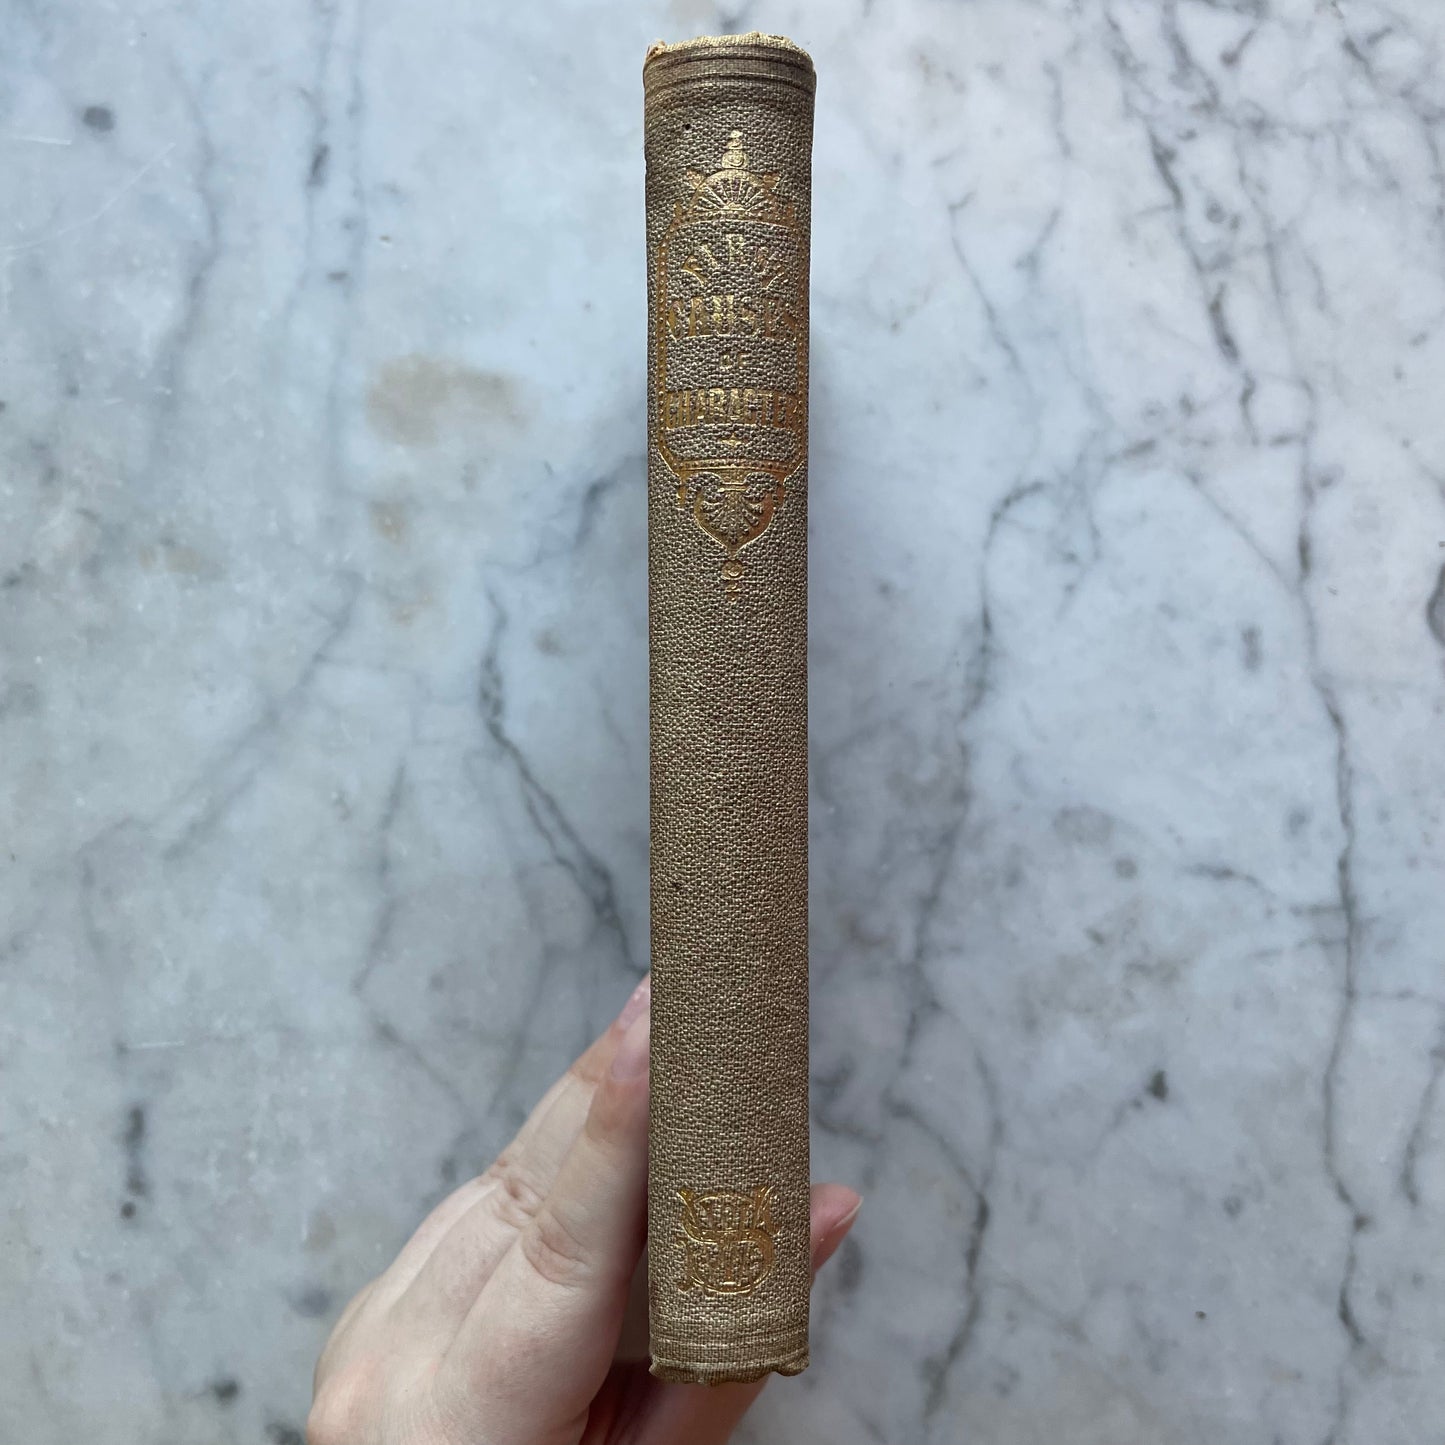 A View at the Foundations; or First Causes of Character by Woodbury M. Fernald